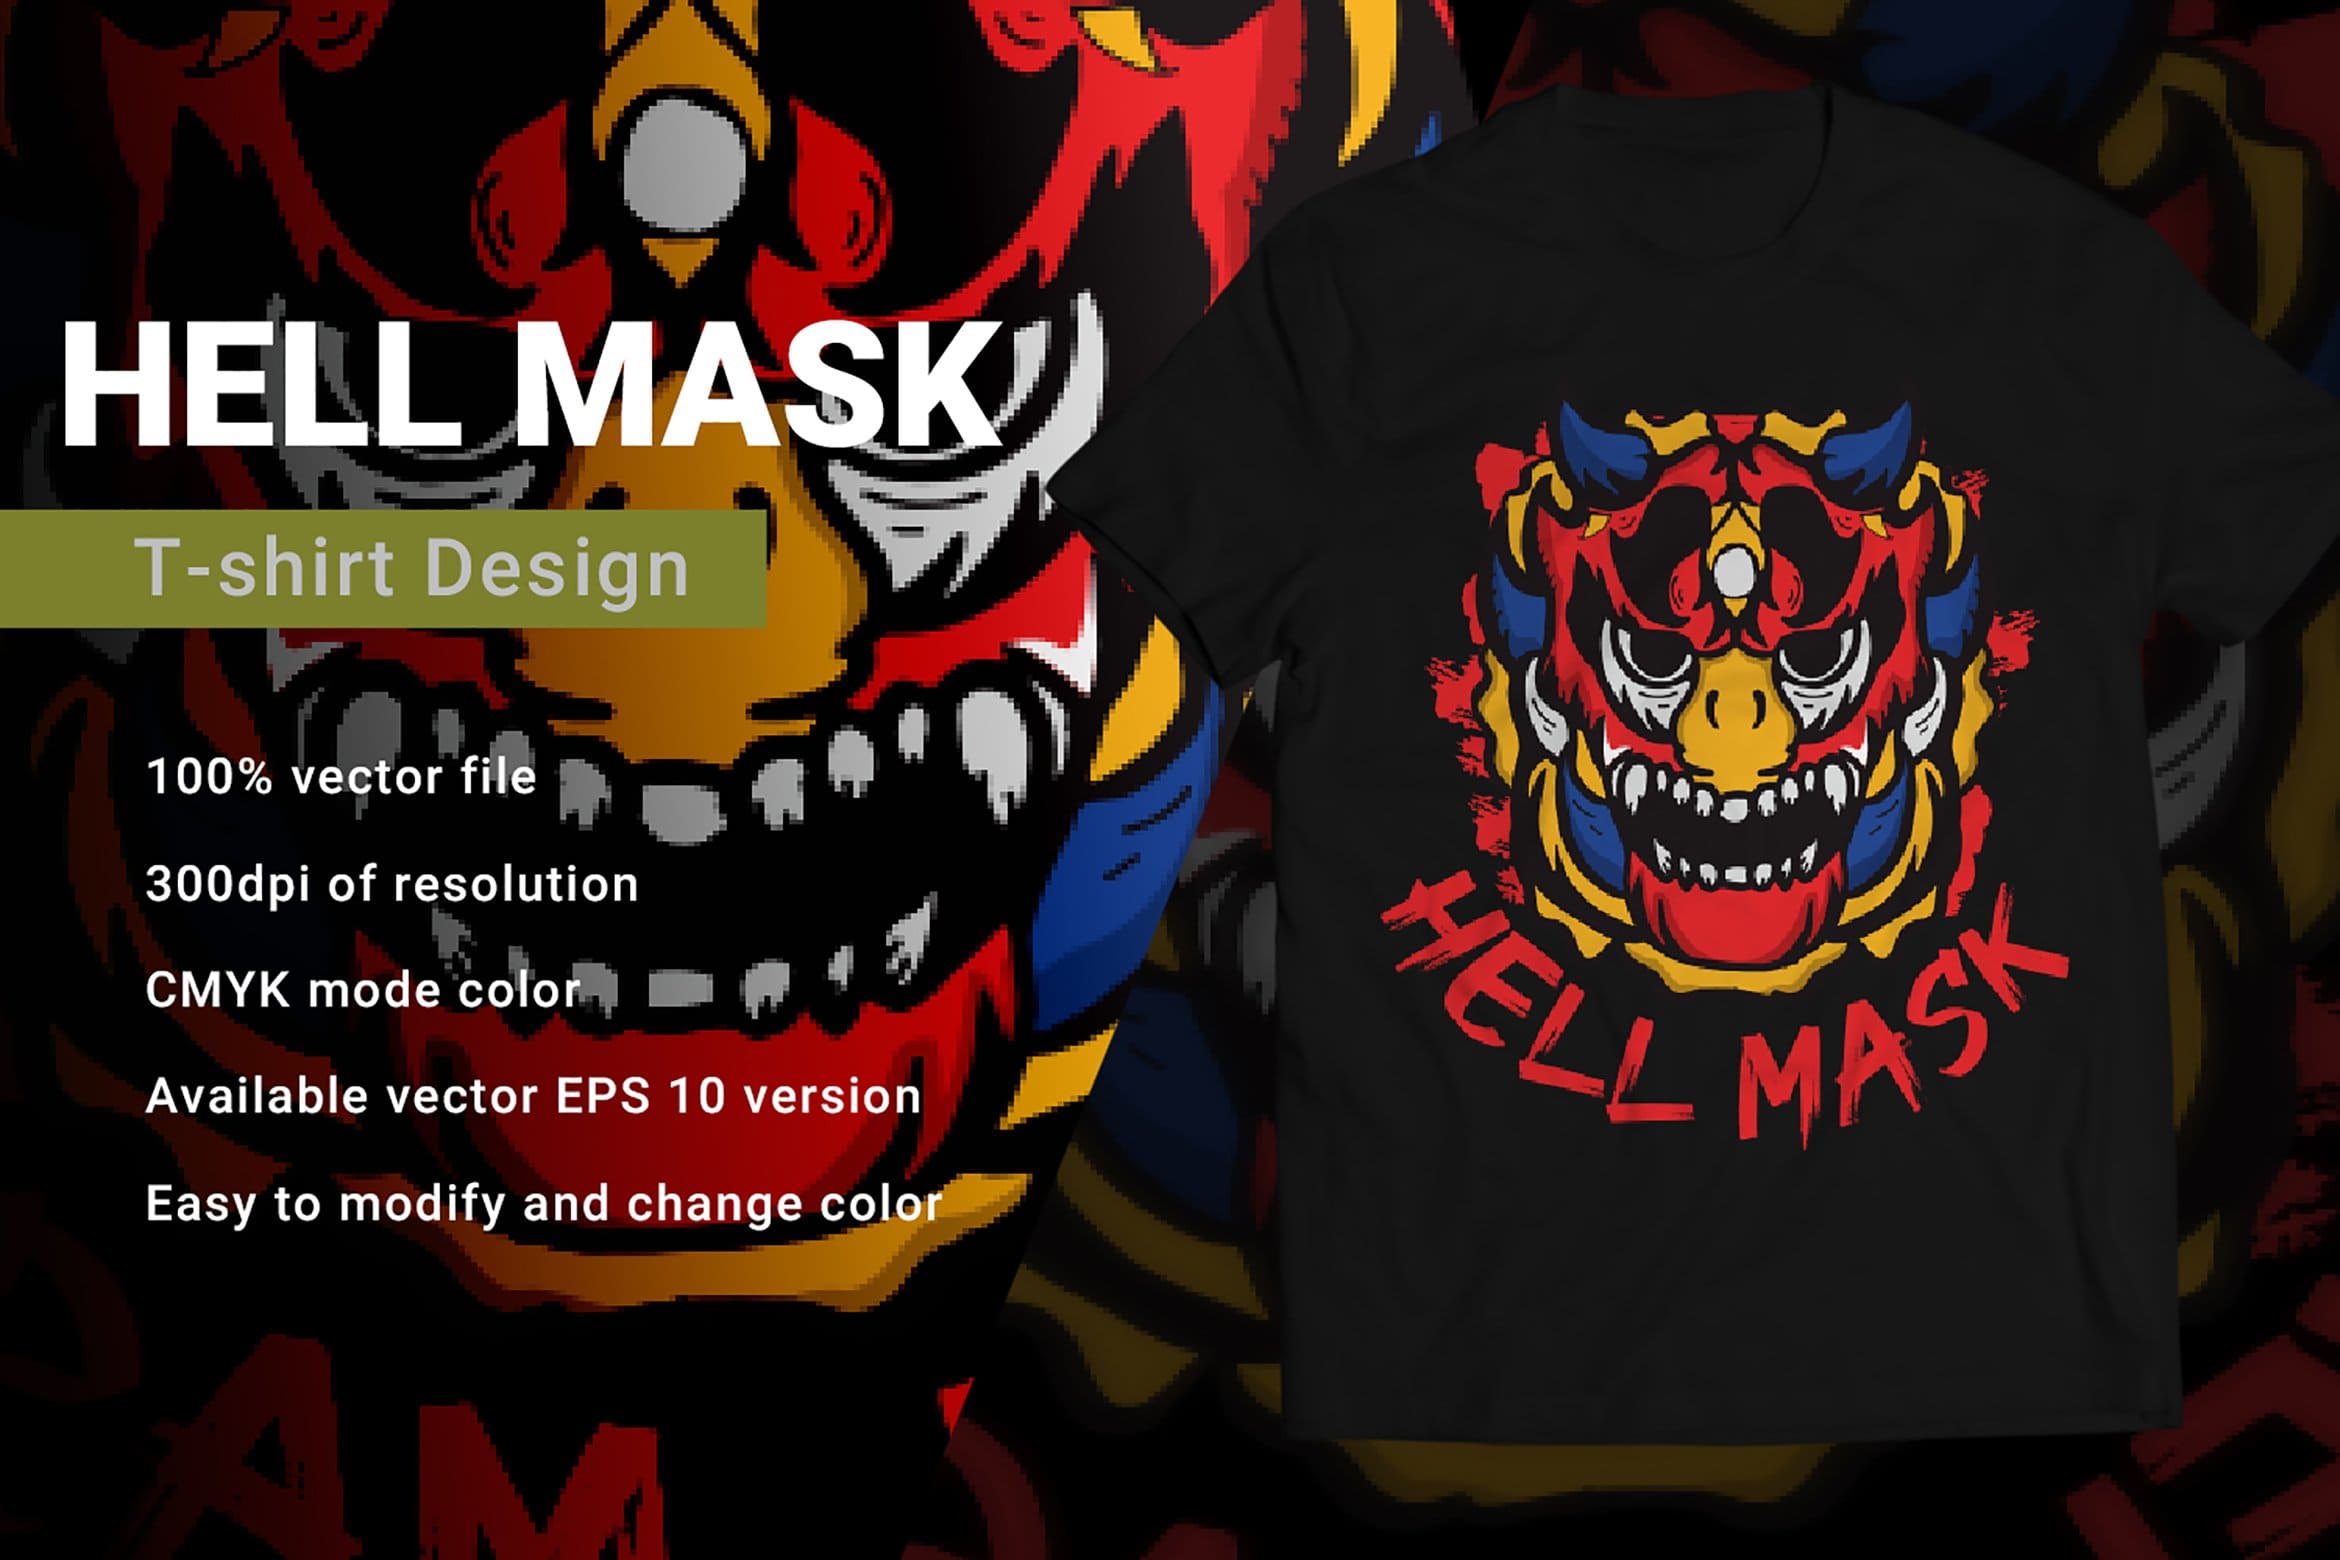 Black T-shirt with color Design "Hell Mask".